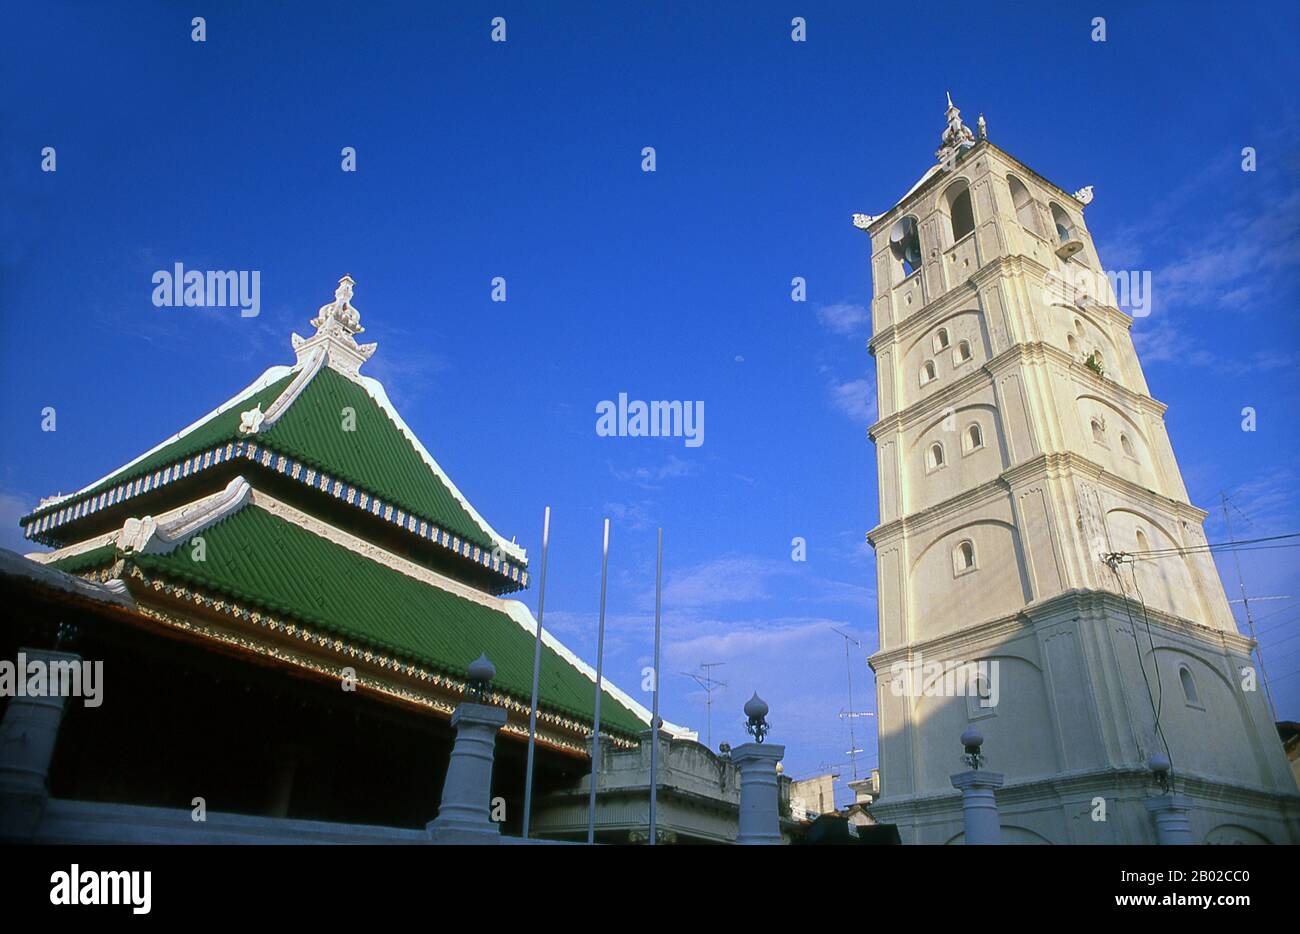 The Kampung Kling Mosque's original structure, built by Indian Muslim traders in 1748, was a wooden building and in 1872, it was rebuilt in brick.  The mosque is one of the traditional mosques in Melaka, which still retains its original design. The architectural design of the mosque is a cross between Sumatran, Chinese, Hindu, and the Melaka Malay. The minaret, ablution pool and entrance arch were built at the same time as the main building.  The minaret resembles a pagoda. The mosque also has a blend of English and Portuguese glazed tiles, Corinthian columns with symmetrical arches in the mai Stock Photo